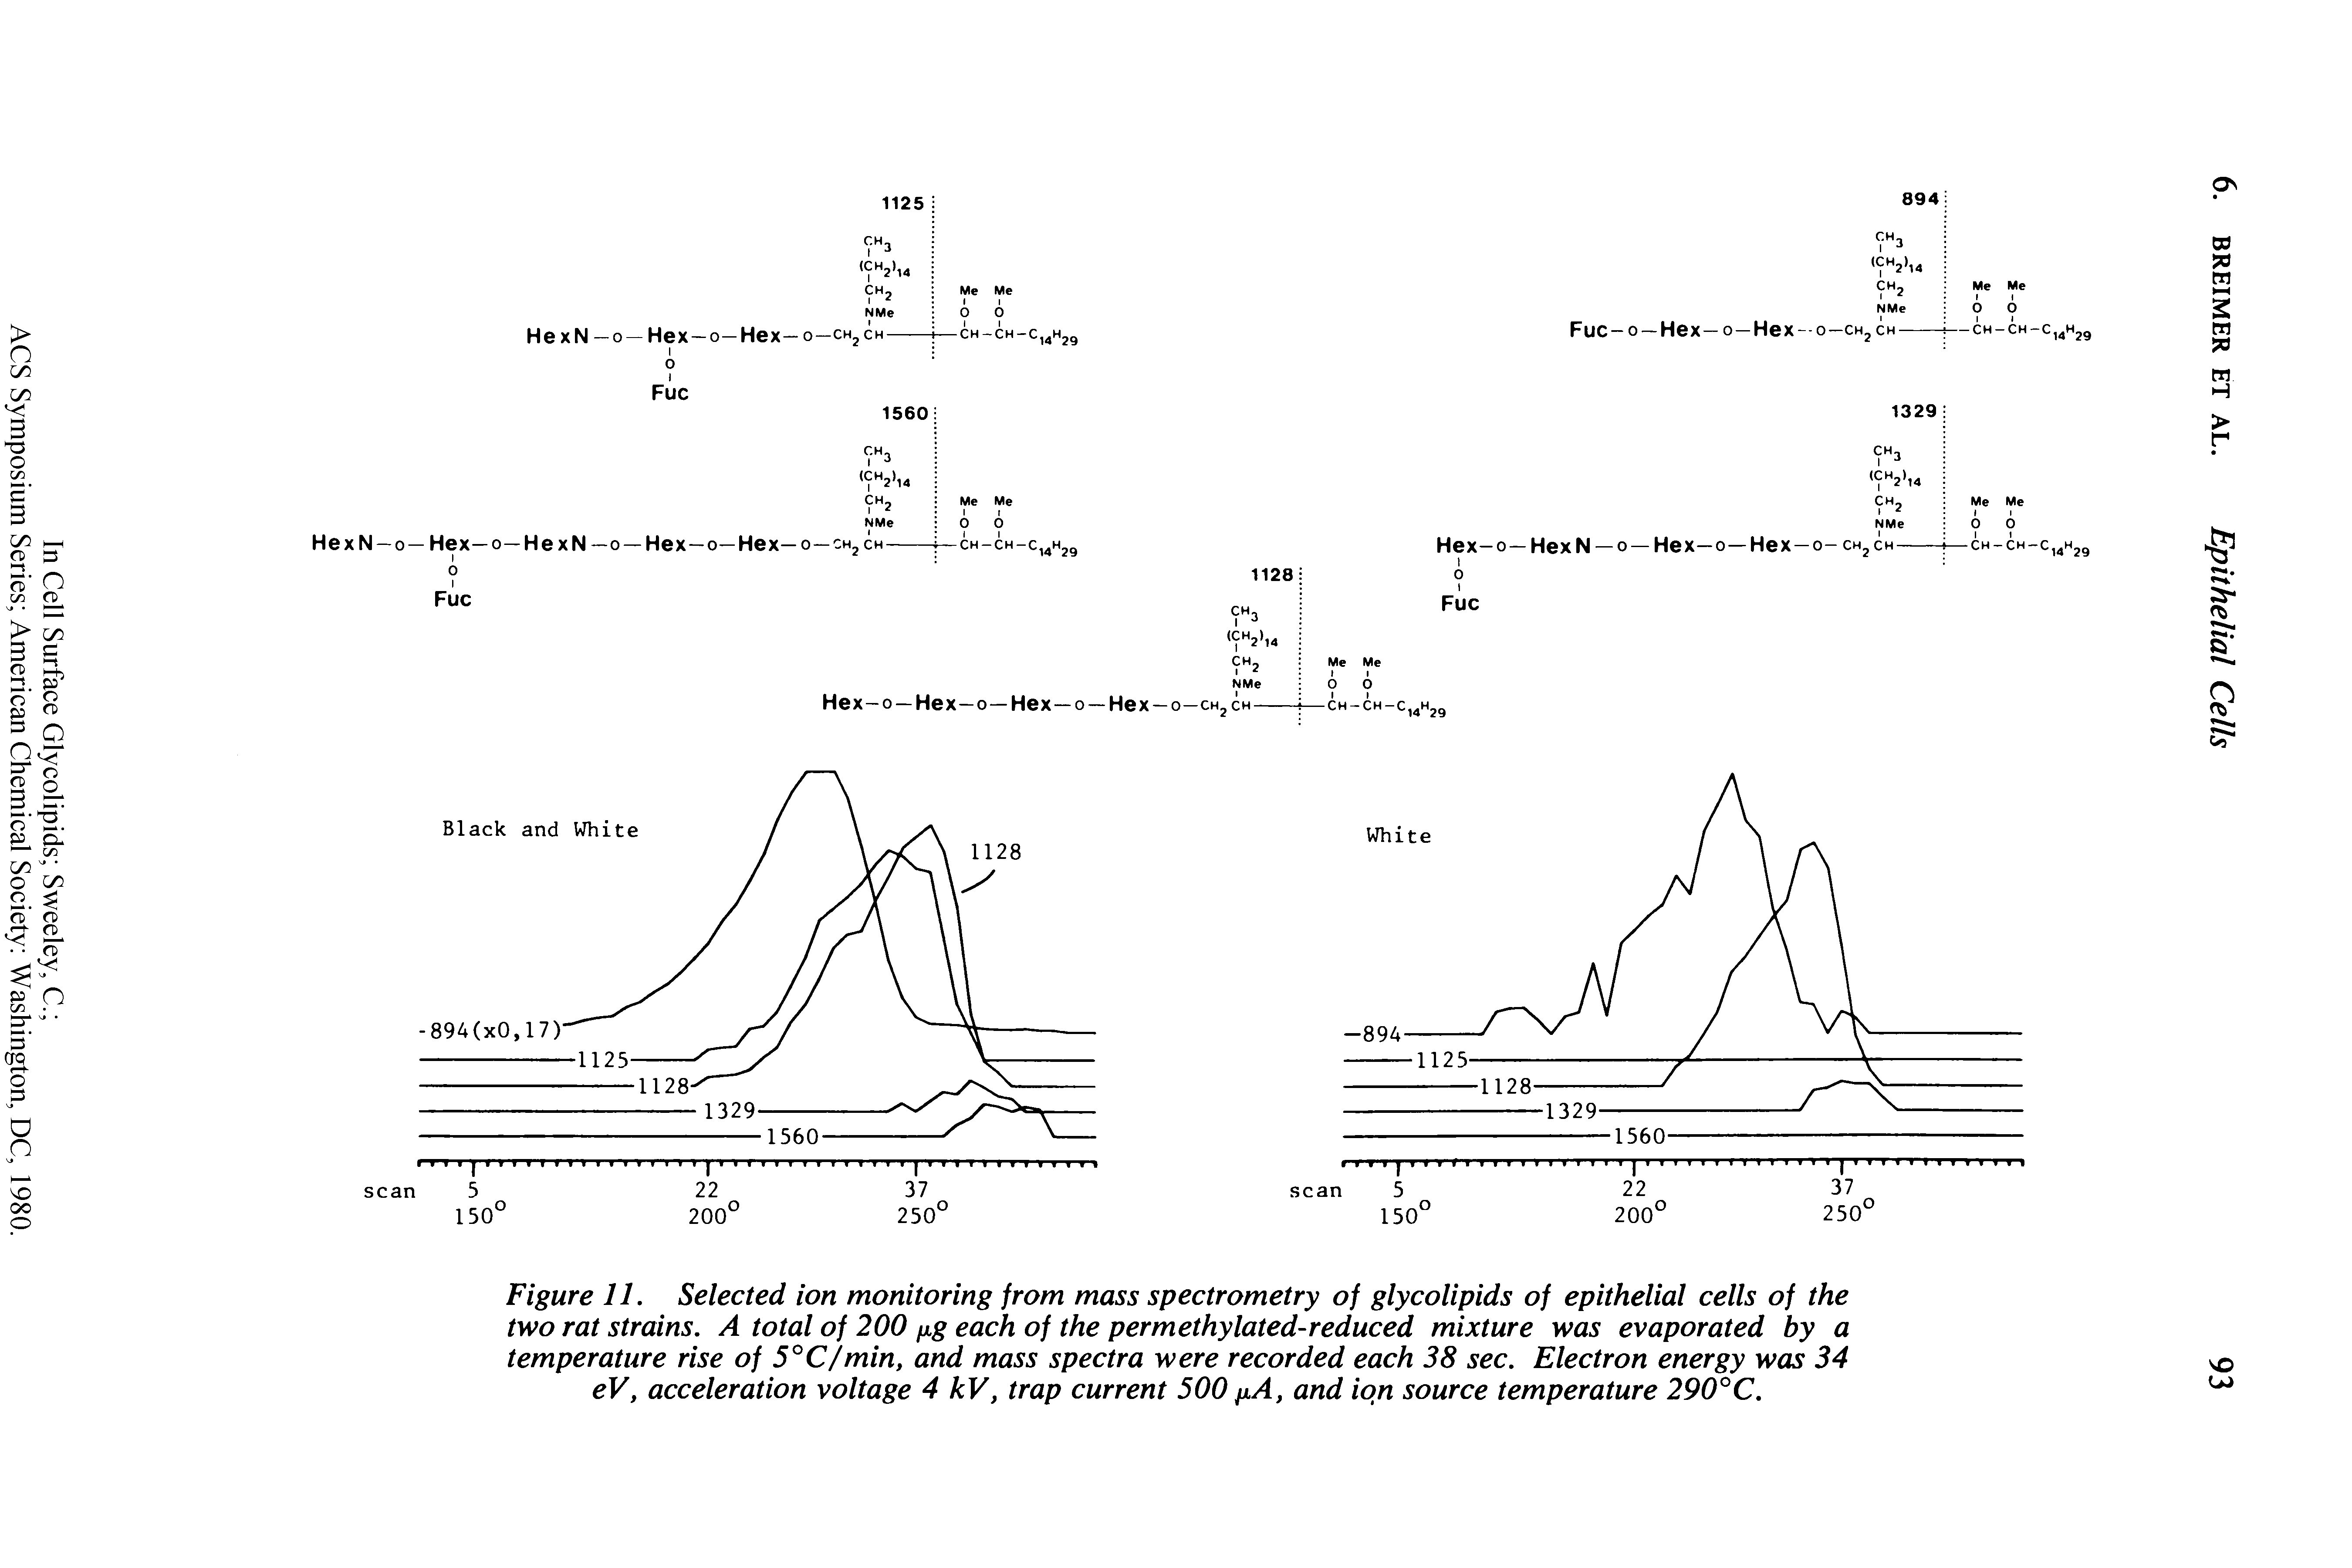 Figure 11. Selected ion monitoring from mass spectrometry of glycolipids of epithelial cells of the two rat strains. A total of 200 fig each of the permethylated-reduced mixture was evaporated by a temperature rise of 5°C/min, and mass spectra were recorded each 38 sec. Electron energy was 34 eV, acceleration voltage 4 kV, trap current 500 fiA, and ion source temperature 290°C.